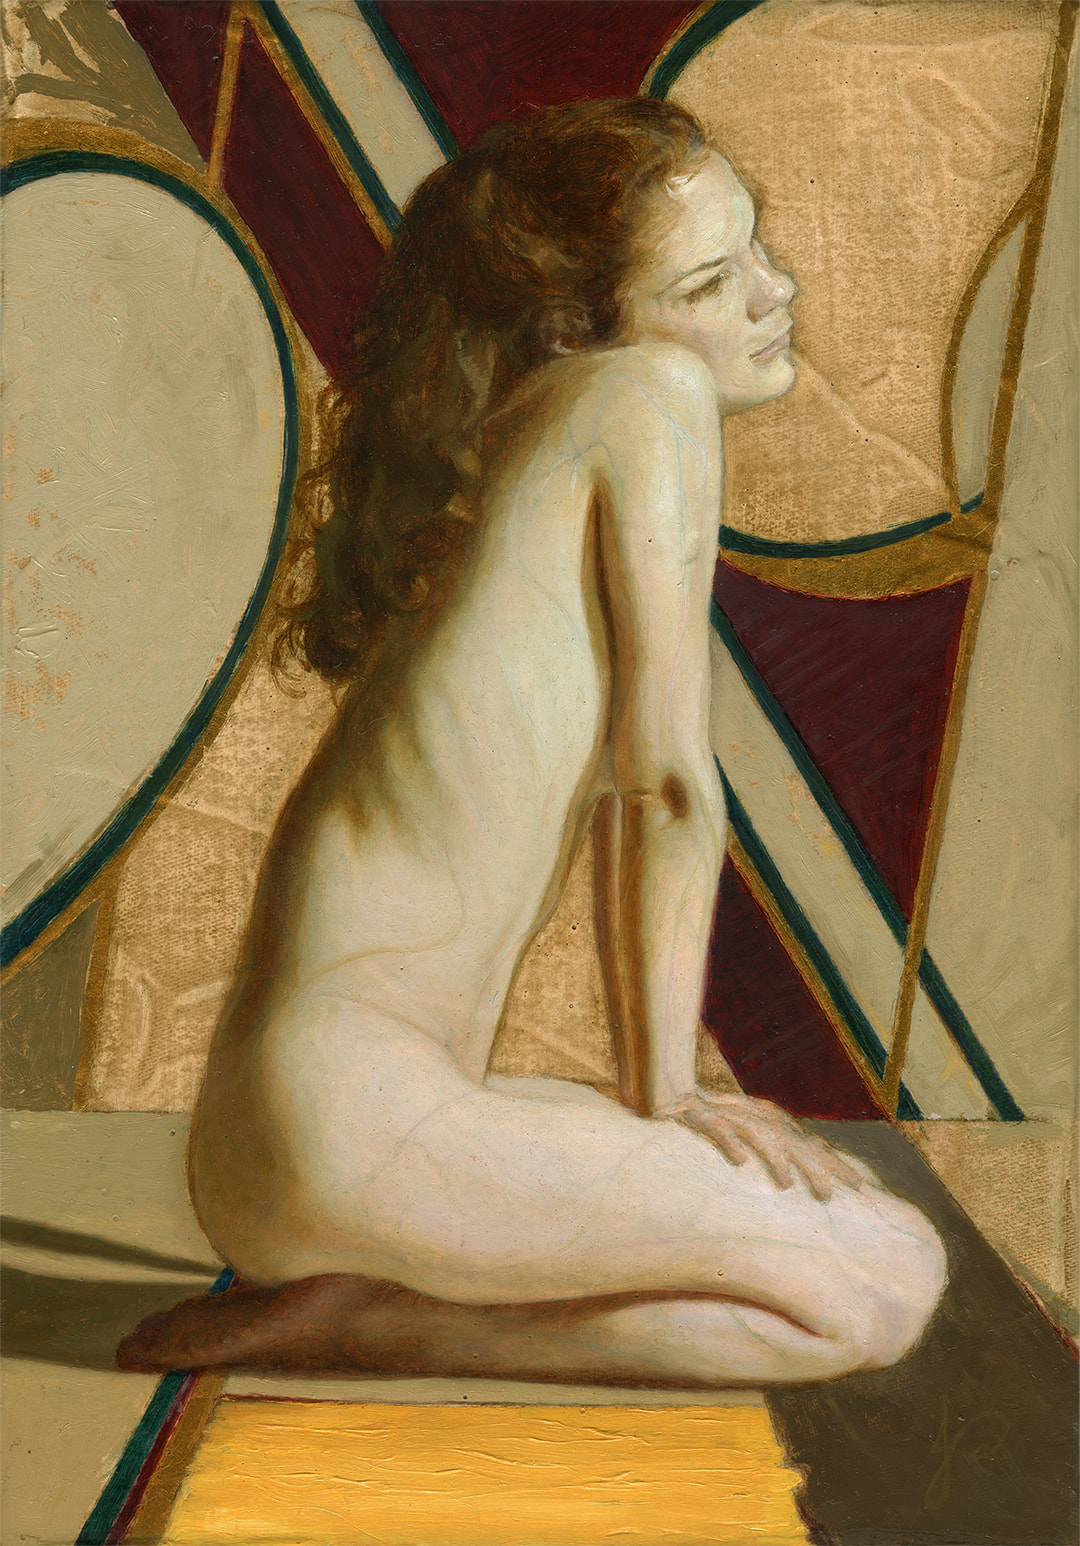 Child of Mars' Gold Gilded Oil painting by Jacqueline Gomez of Nude Female Figurative Artwork